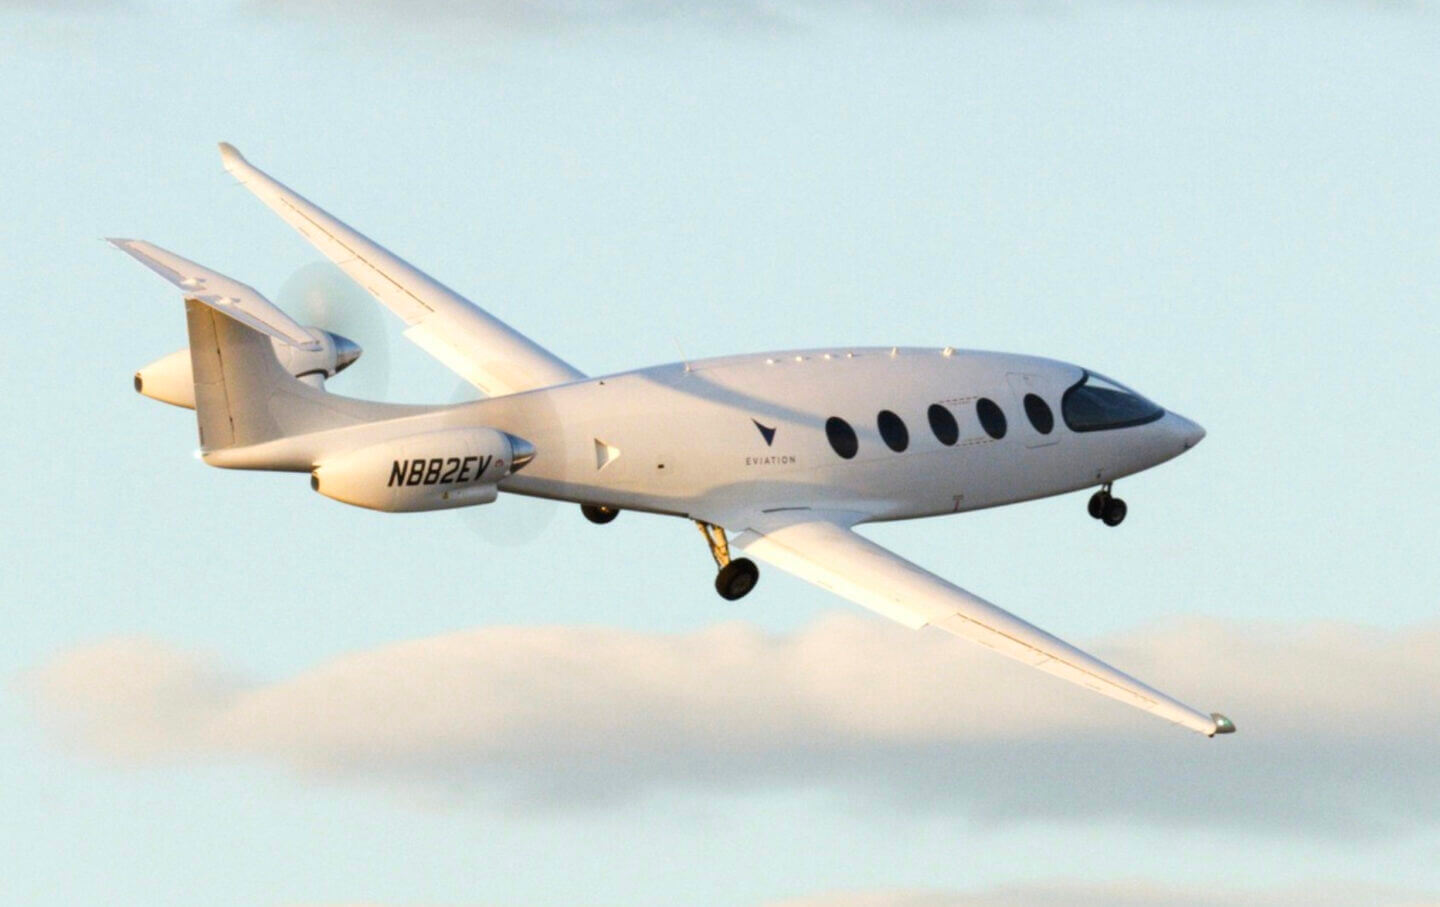 PICTURE OF ALICE THE ALL ELECTRIC COMMERCIAL PASSENGER AIRCRAFT.
